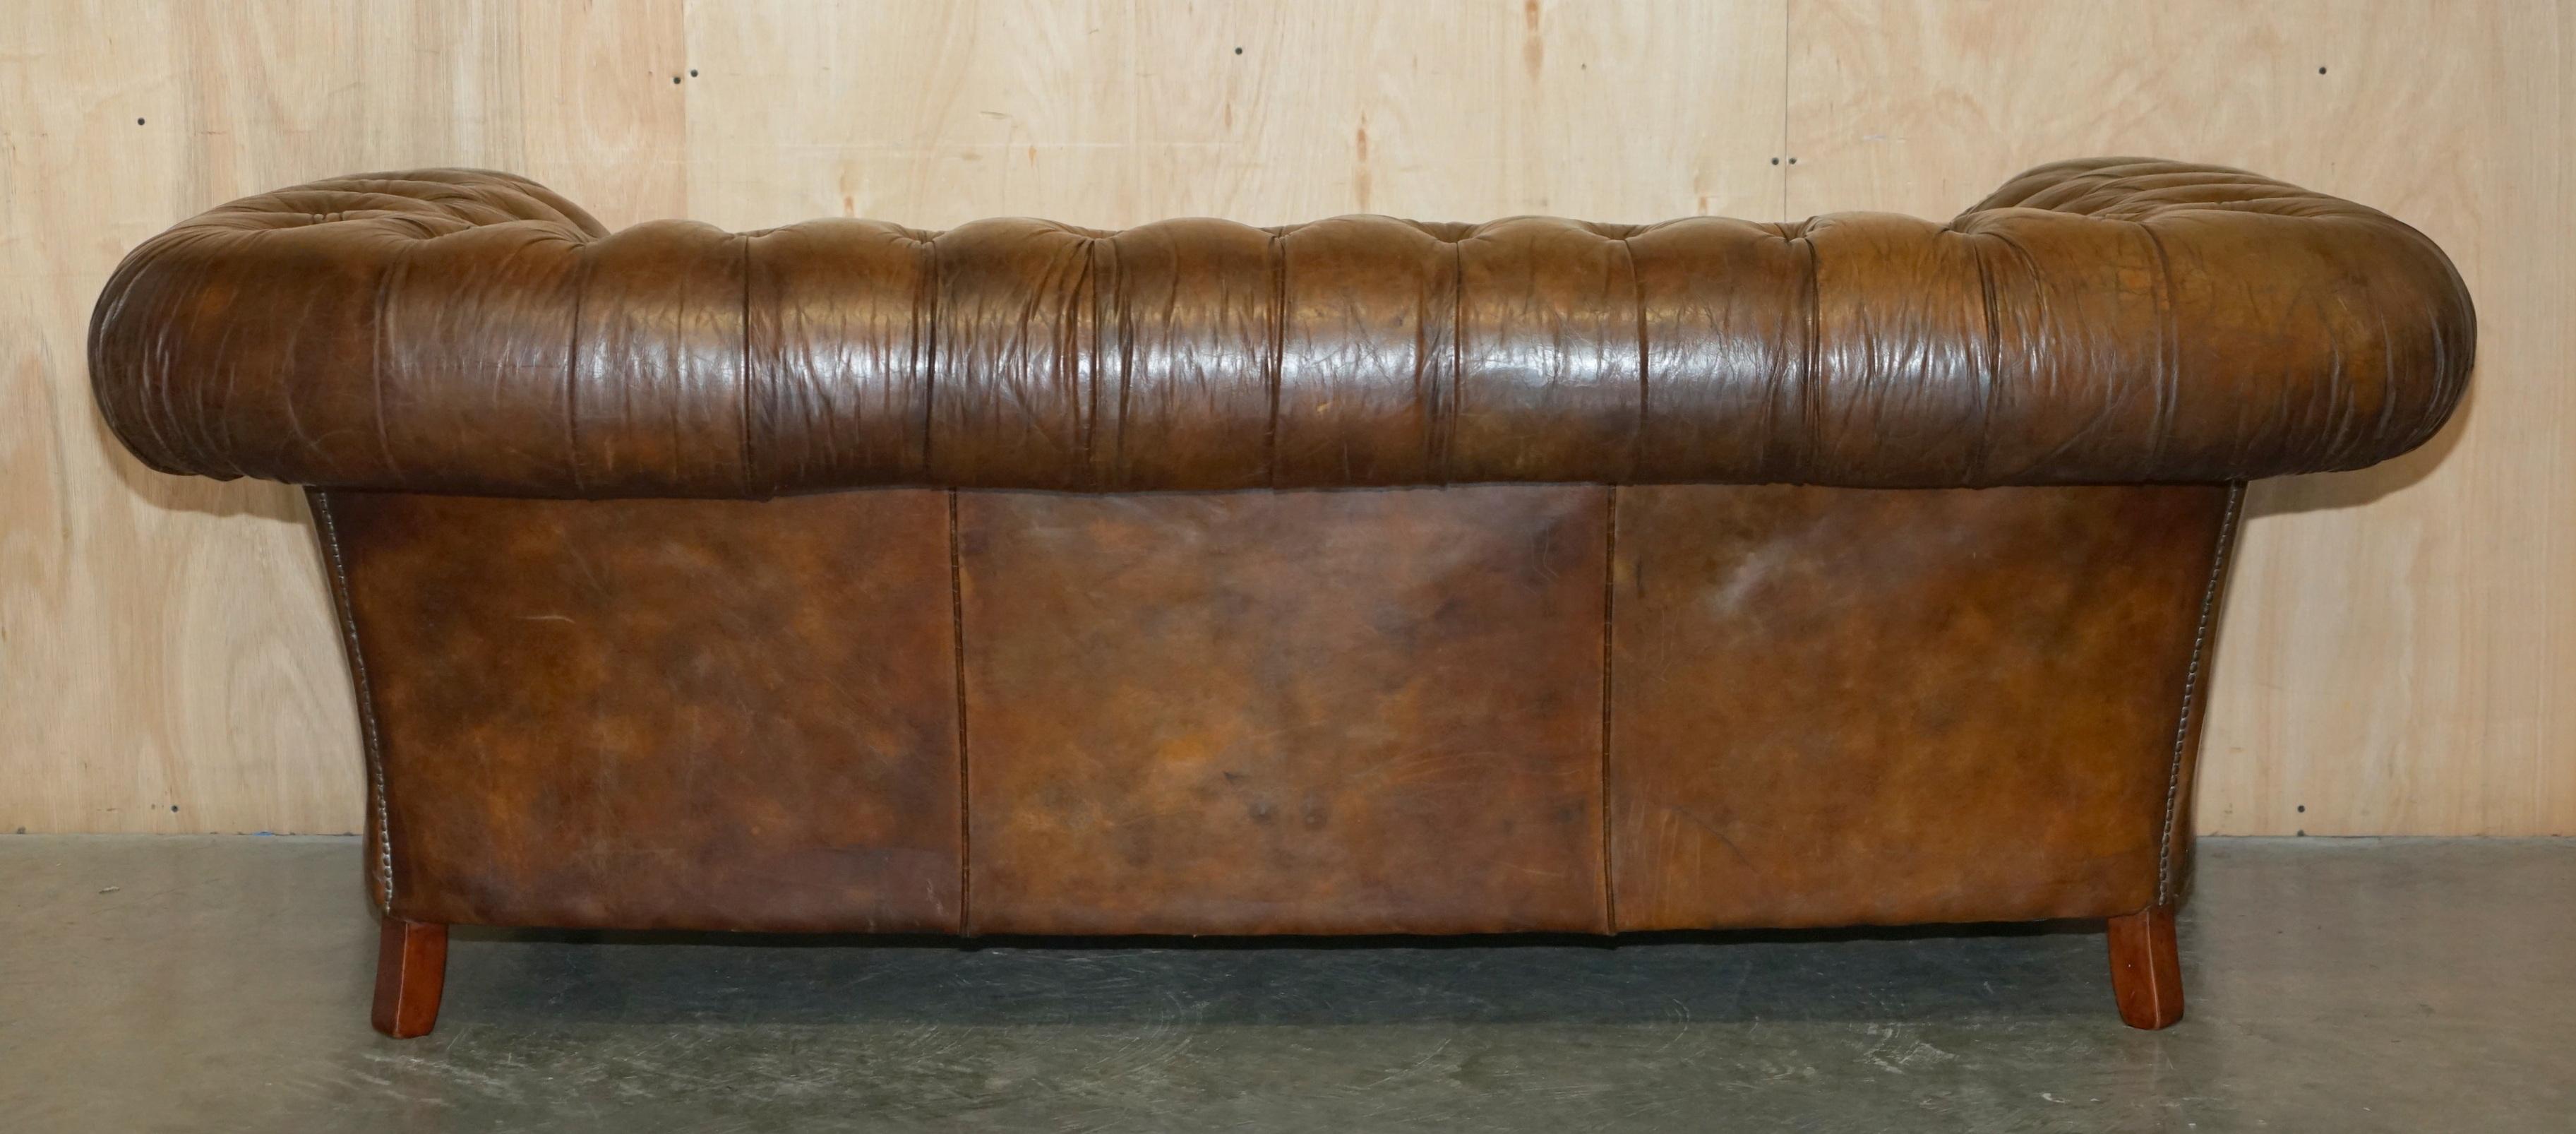 1 OF 2 TIMOTHY OULTON HERITAGE BROWN OVERSIZED LEATHER CHESTERFIELD HALO SOFAs For Sale 6